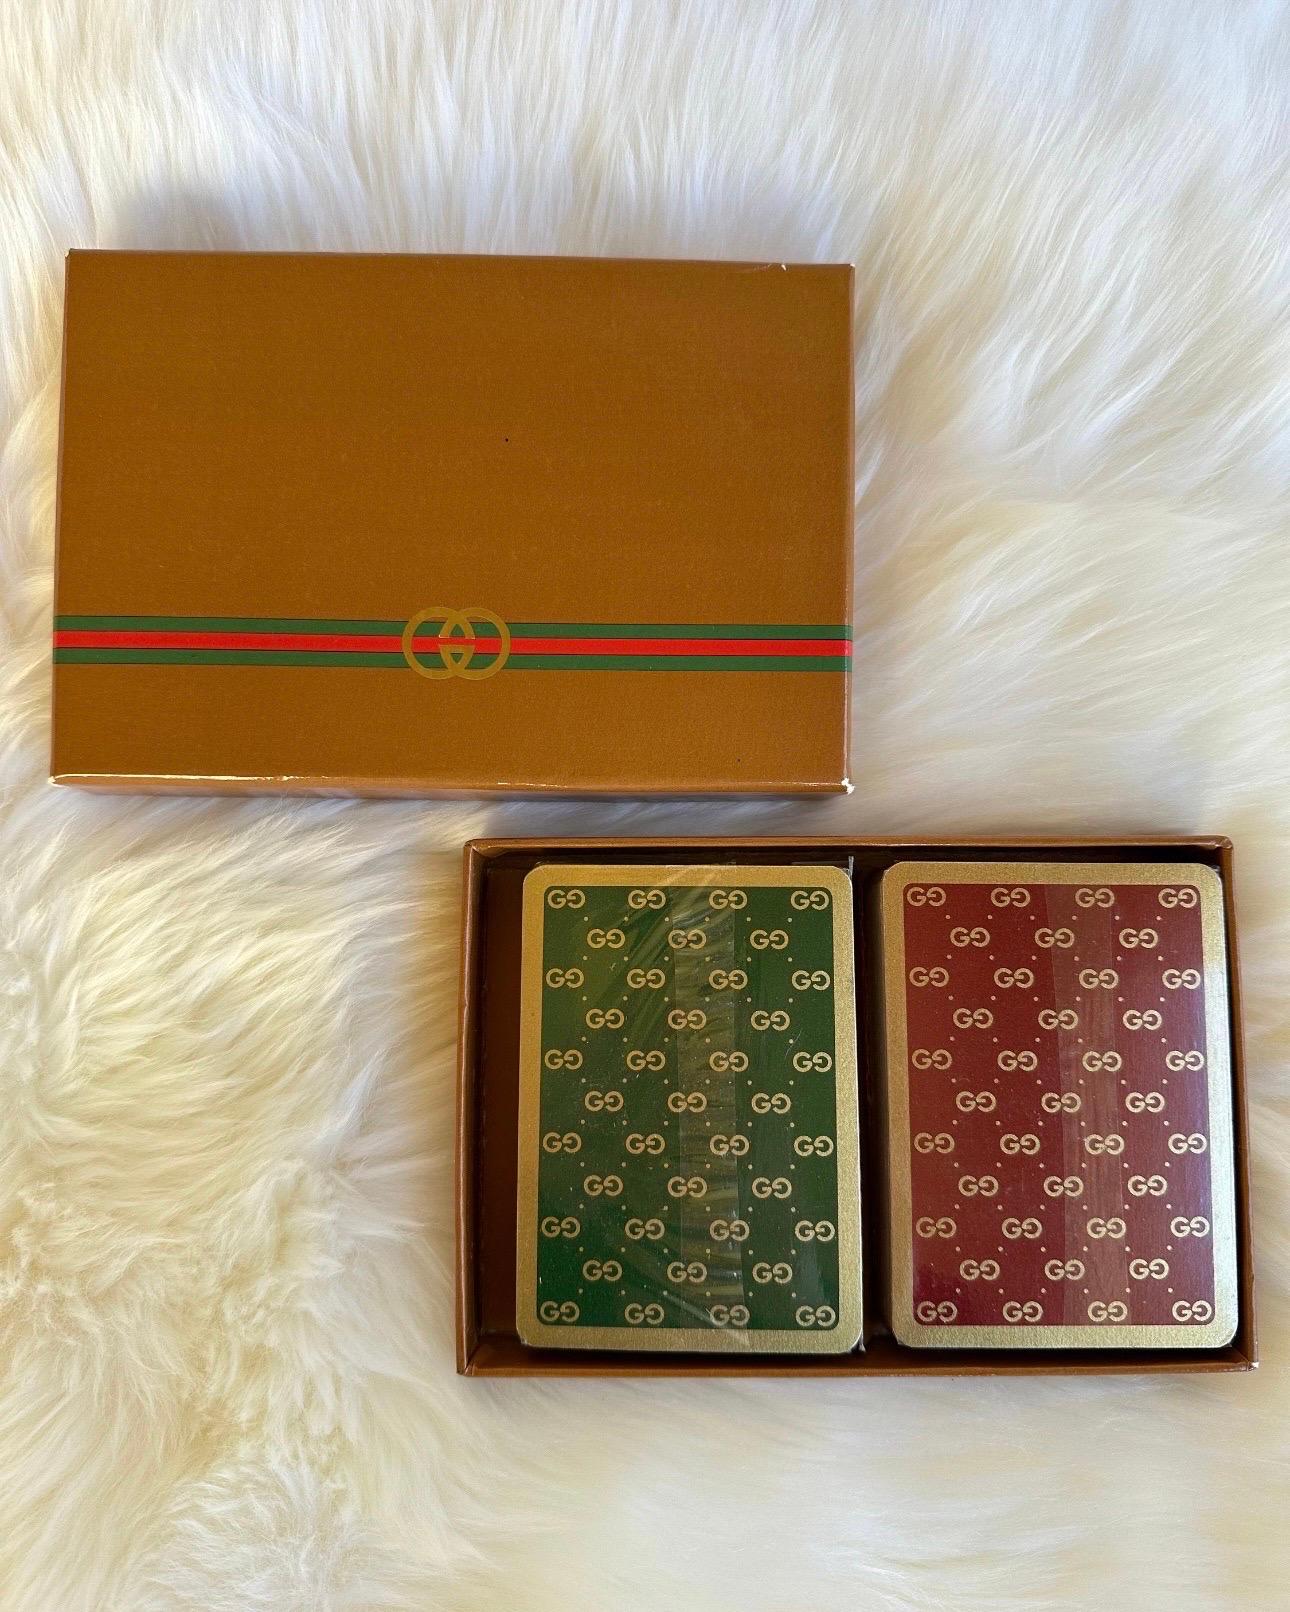 🖤 Gucci Game Night 🖤

Vintage 70s Gucci Playing Card Set

Poker just got a bit more glamorous!

This playing card set comes with two sealed decks of cards, one set of green monogram cards and another set of red monogram cards. The two decks of